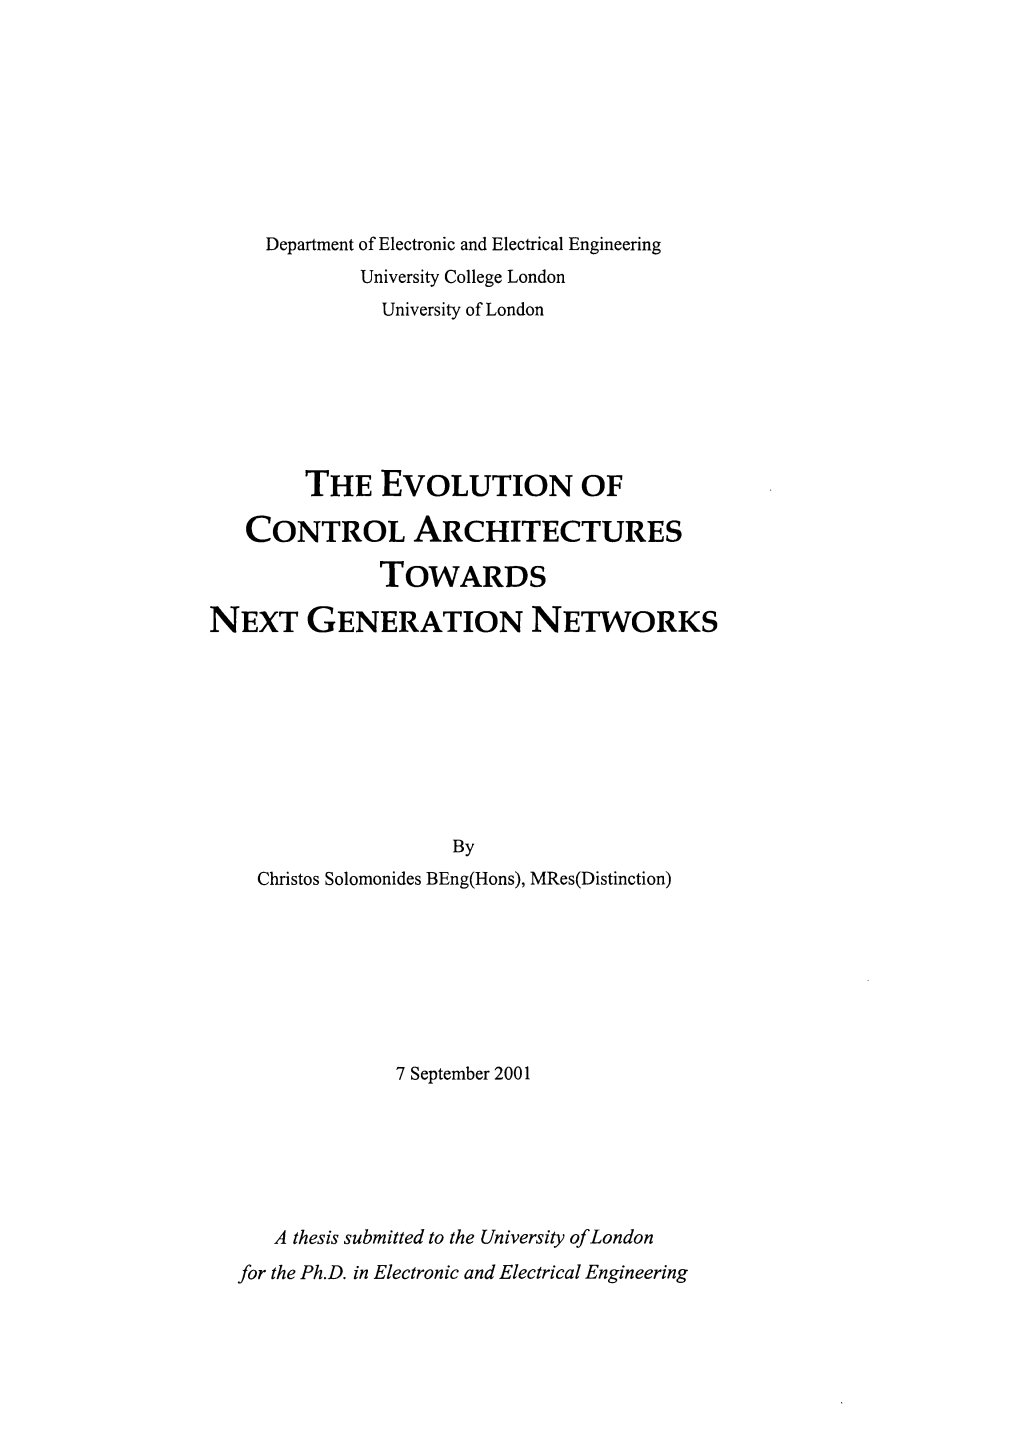 The Evolution of Control Architectures Towards Next Generation